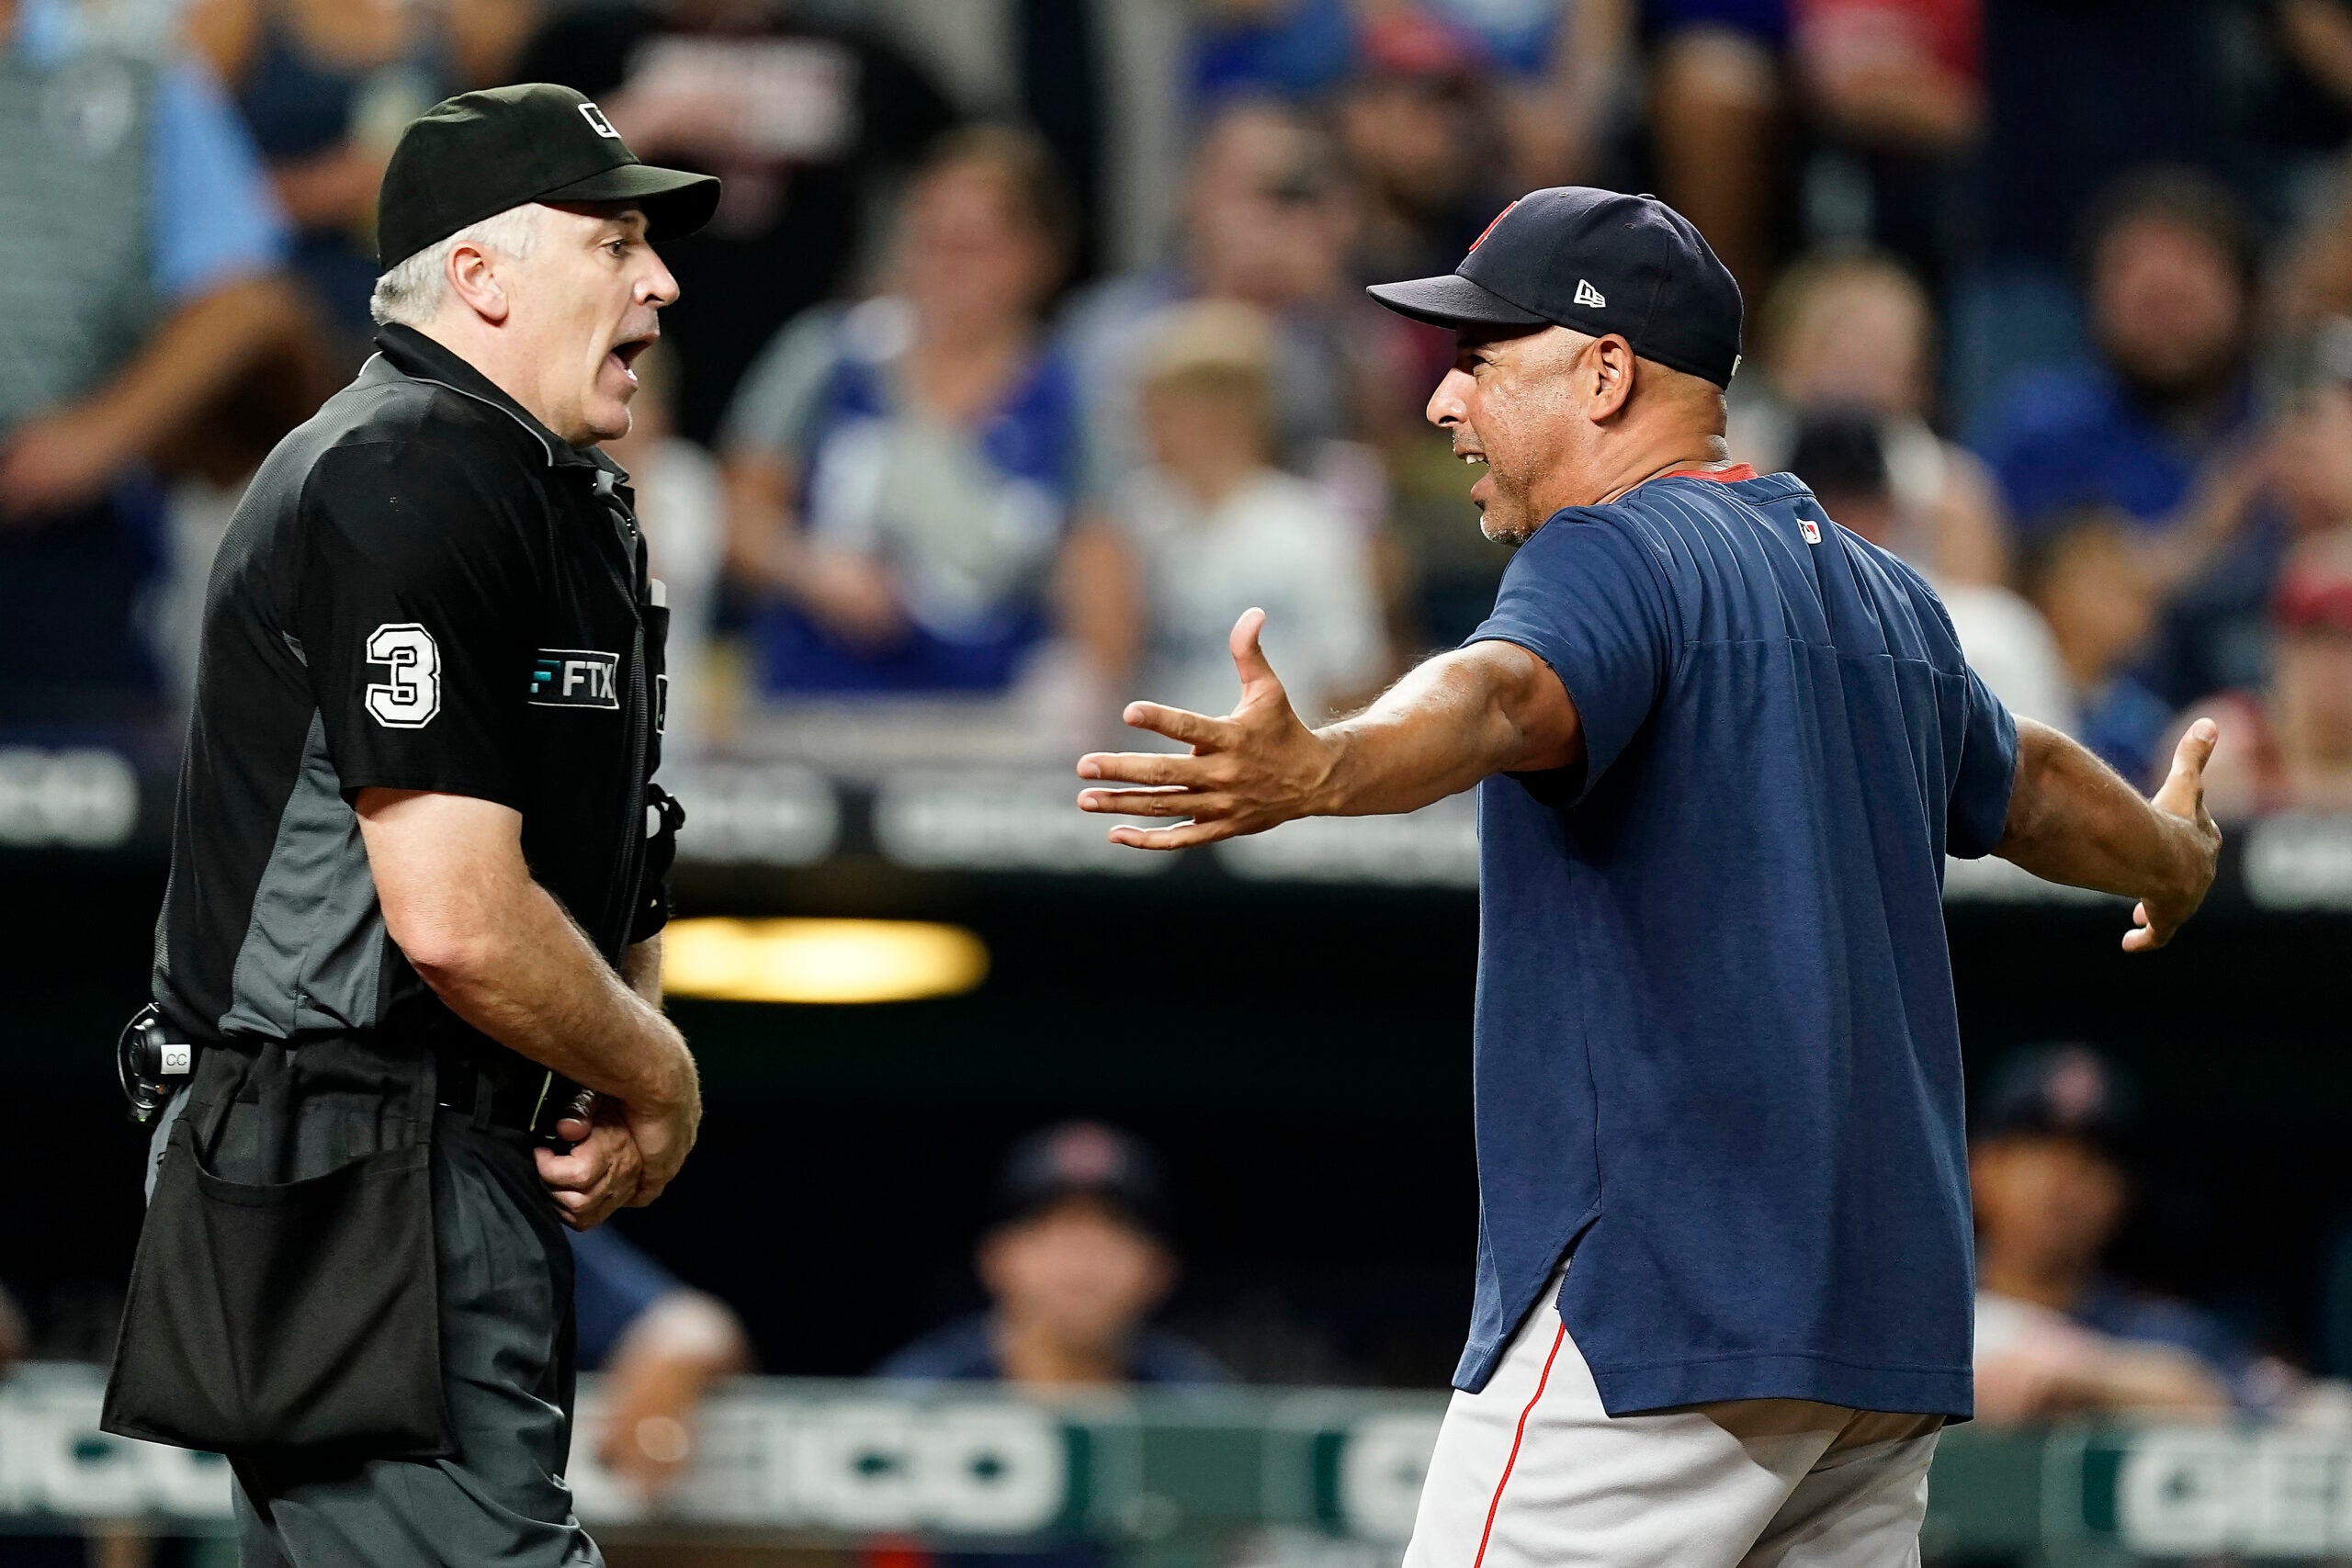 Alex Cora and umpire Bill Welke argue, with Cora's arms out, exasperated.